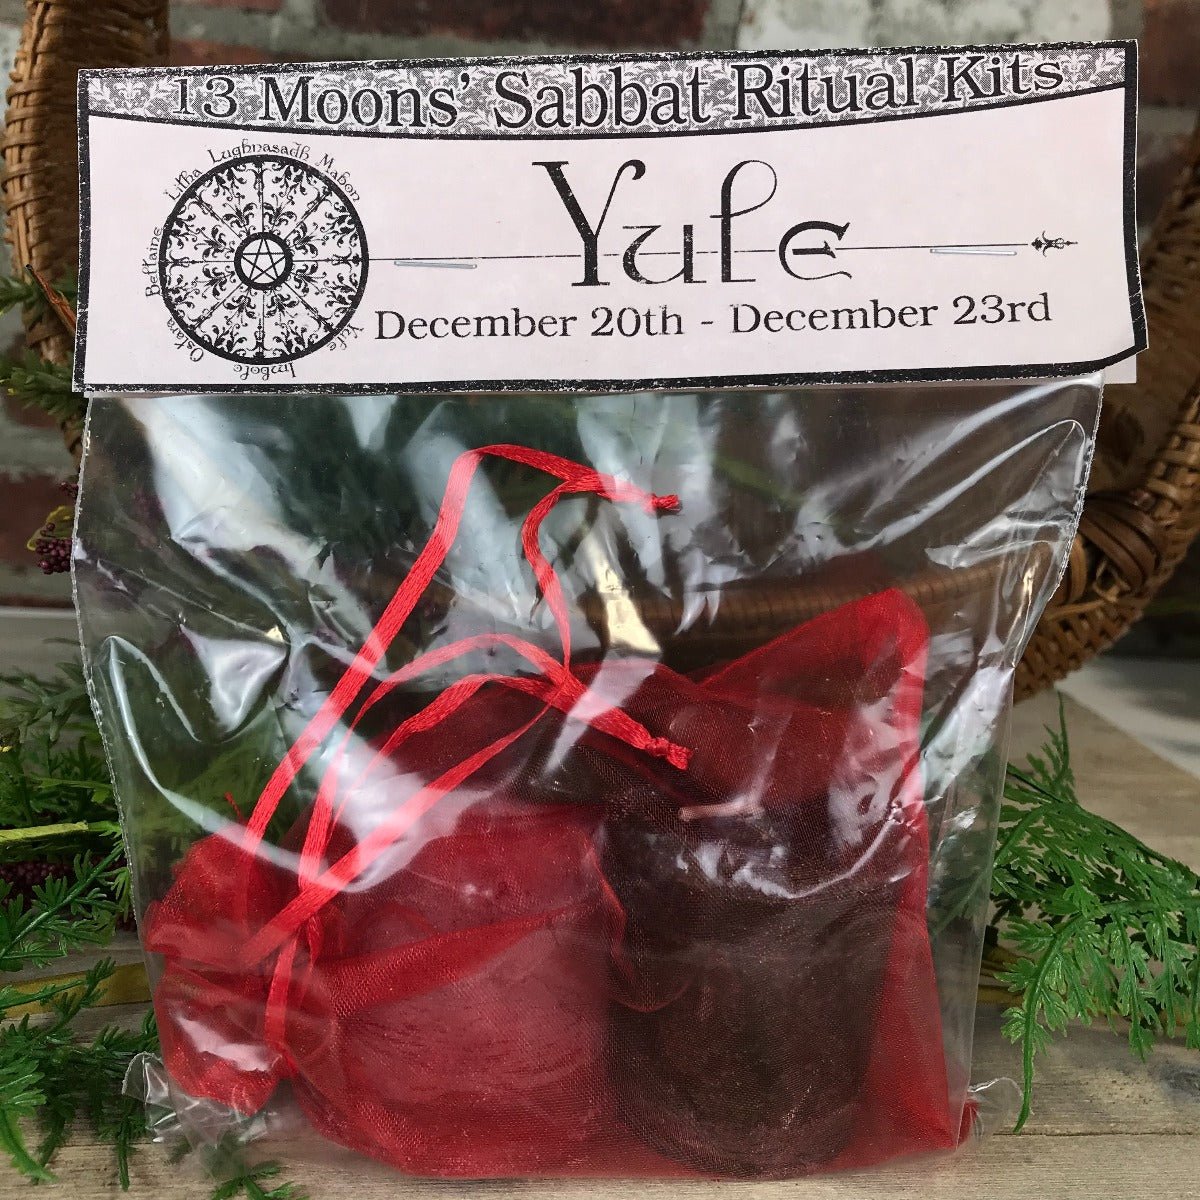 Yule Candle and Stone Set - 13 Moons